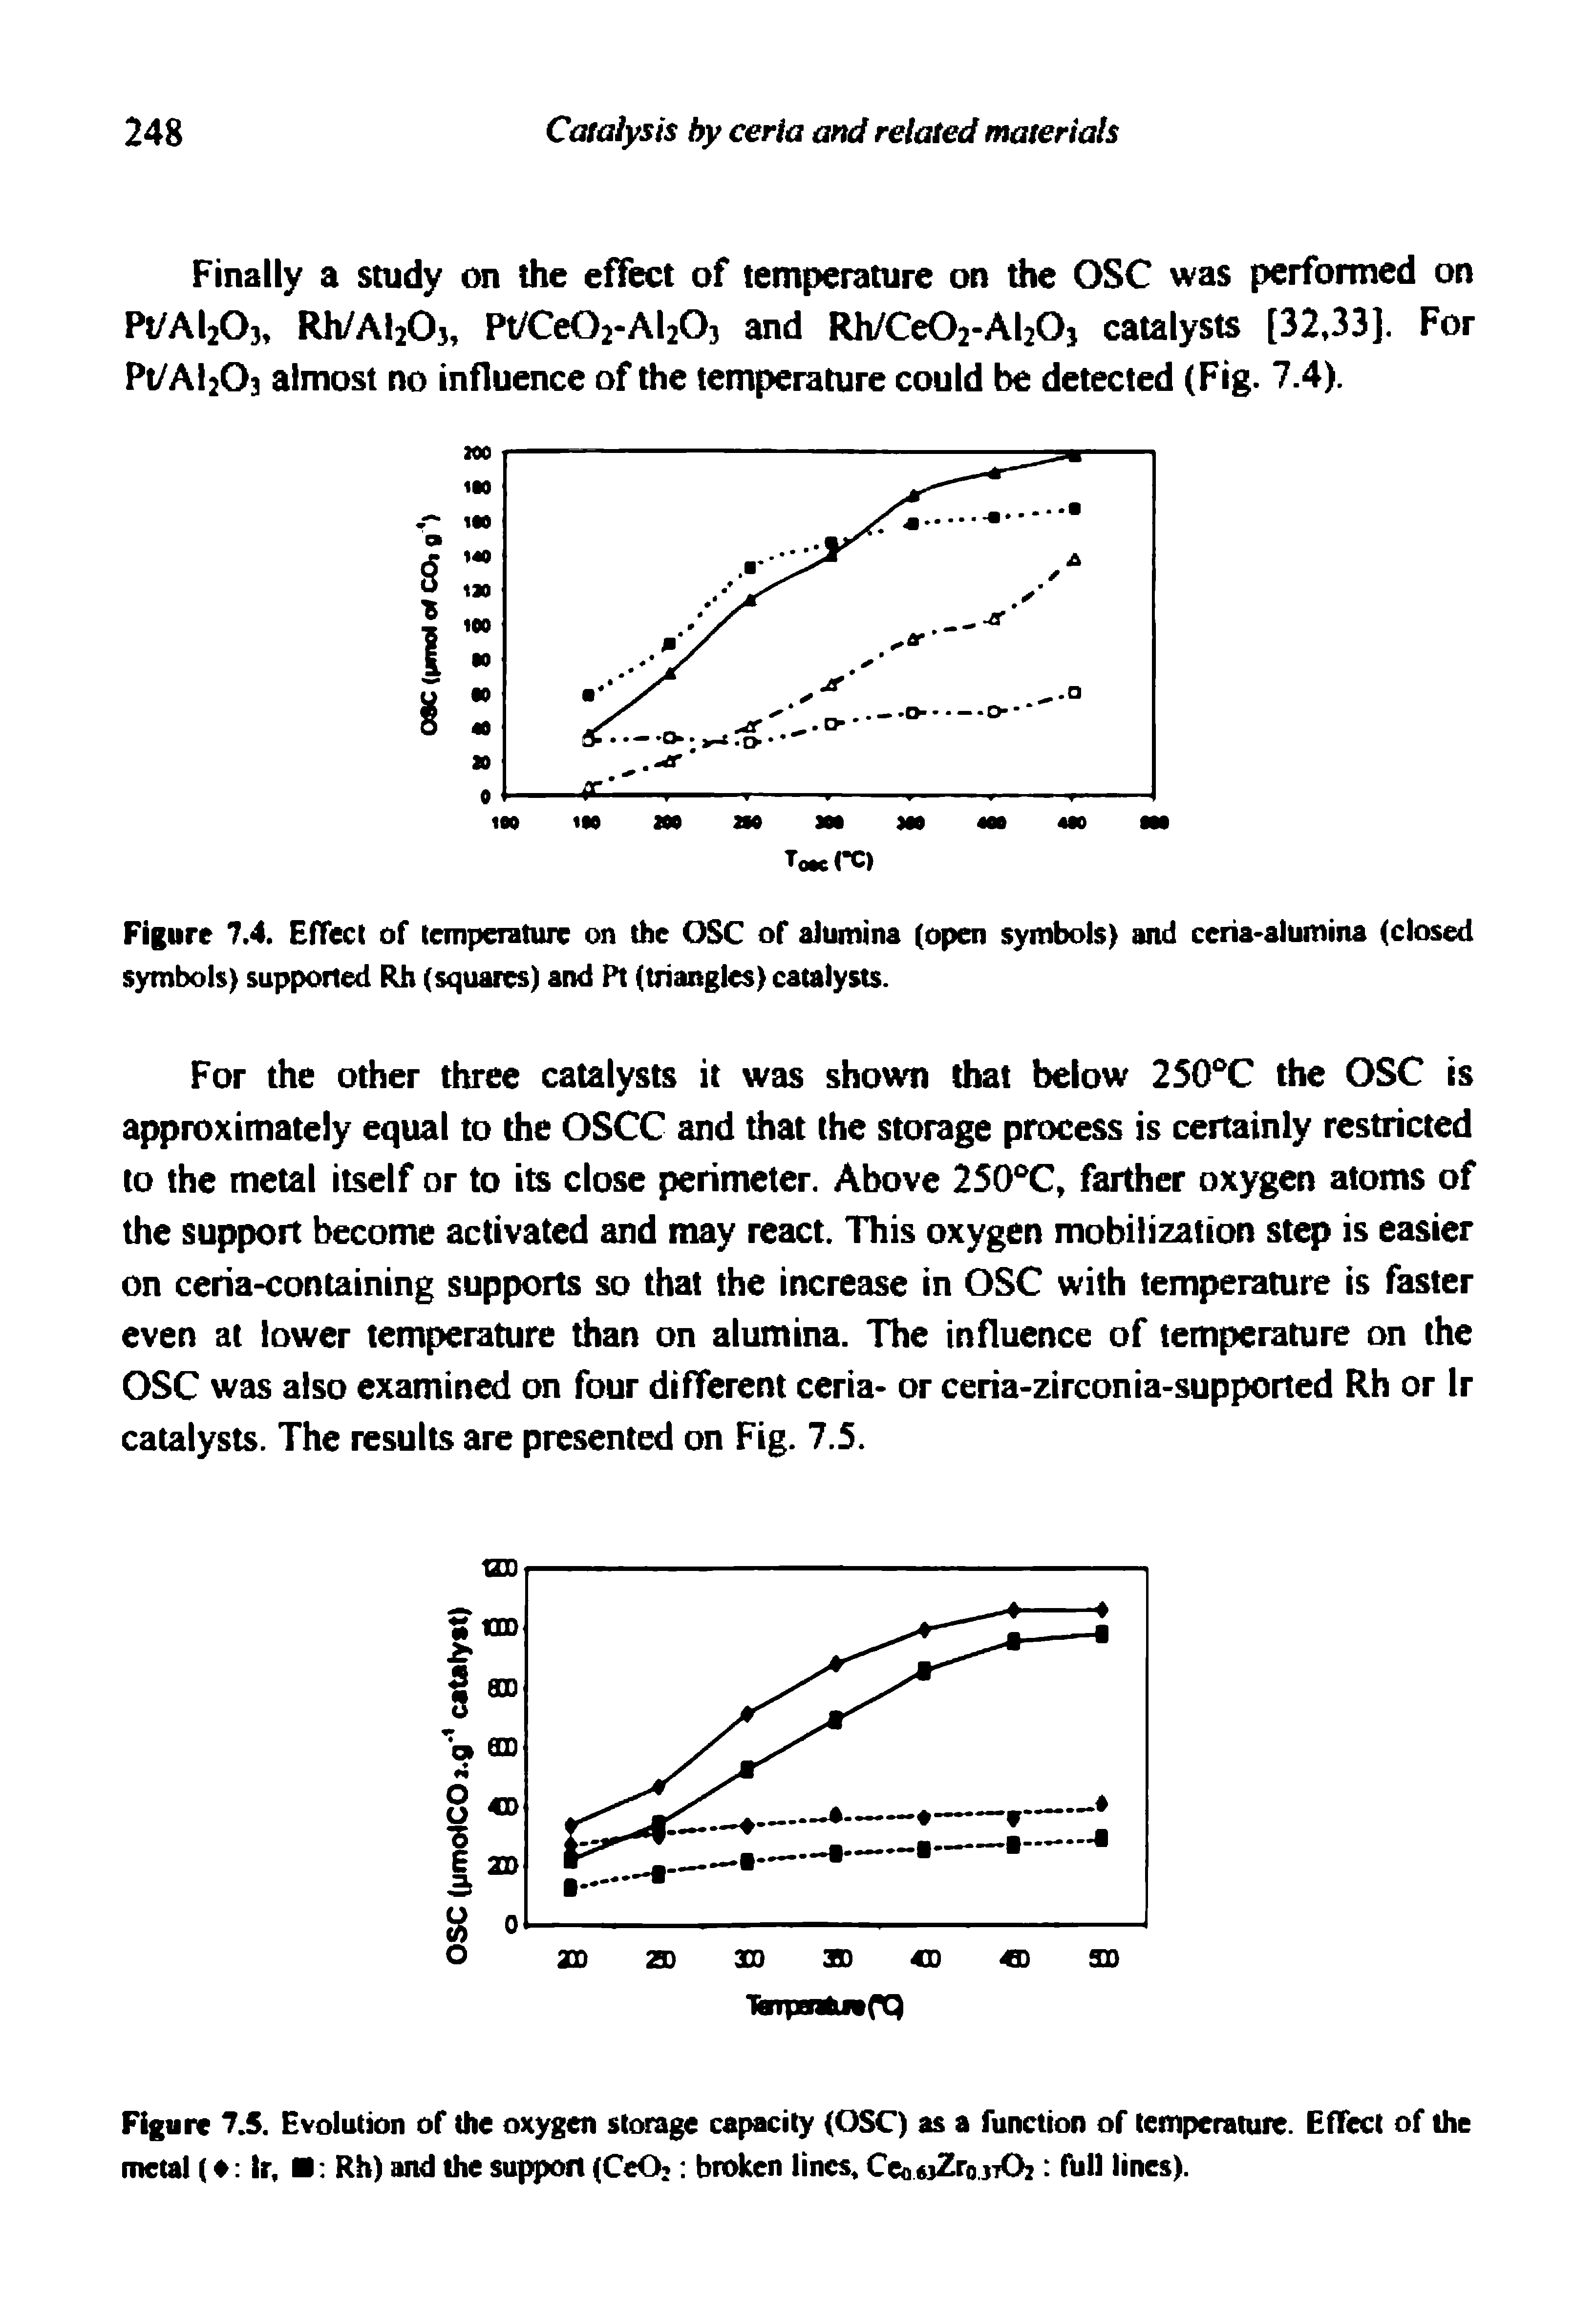 Figure 7.5. Evolution of the oxygen storage capacity (OSC) as a function of temperature. Effect of the metal (a tr. Rh) and the support (CeO broken lines. Ceo ftjZrojTOz full lines).